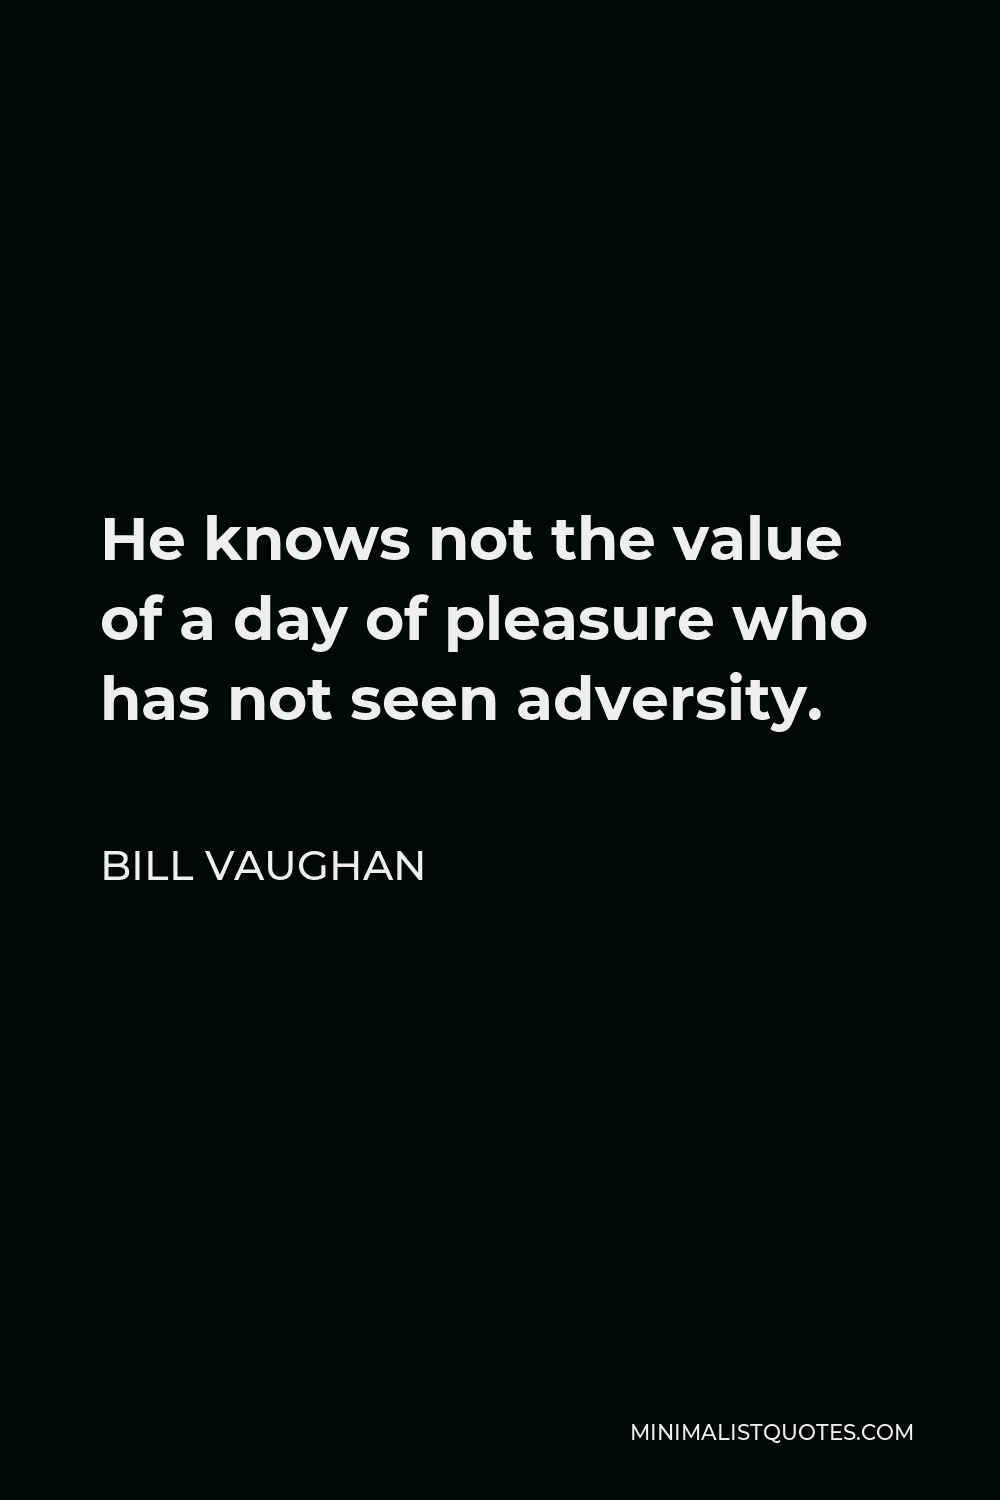 Bill Vaughan Quote - He knows not the value of a day of pleasure who has not seen adversity.